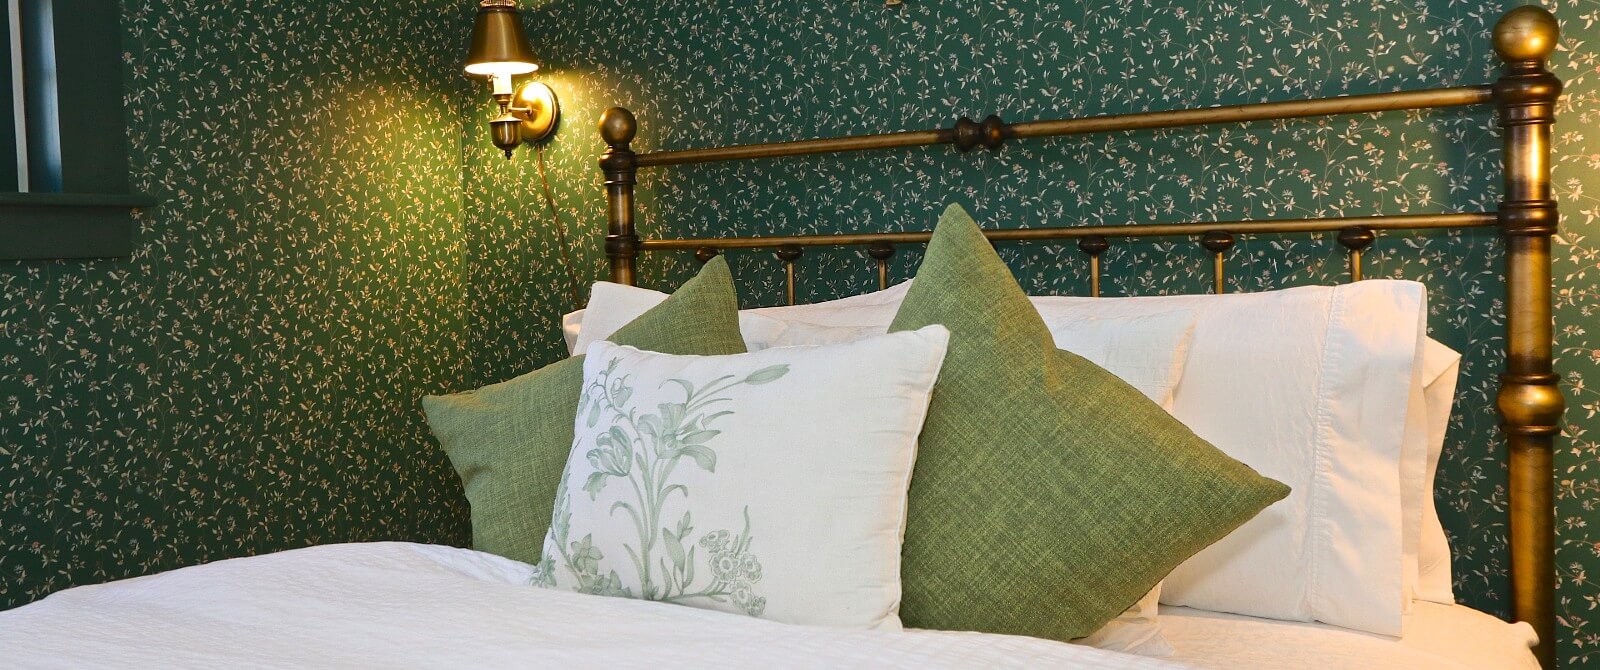 Bedroom with green floral wallpaper, wrought iron bed with white and green bedding and pillows